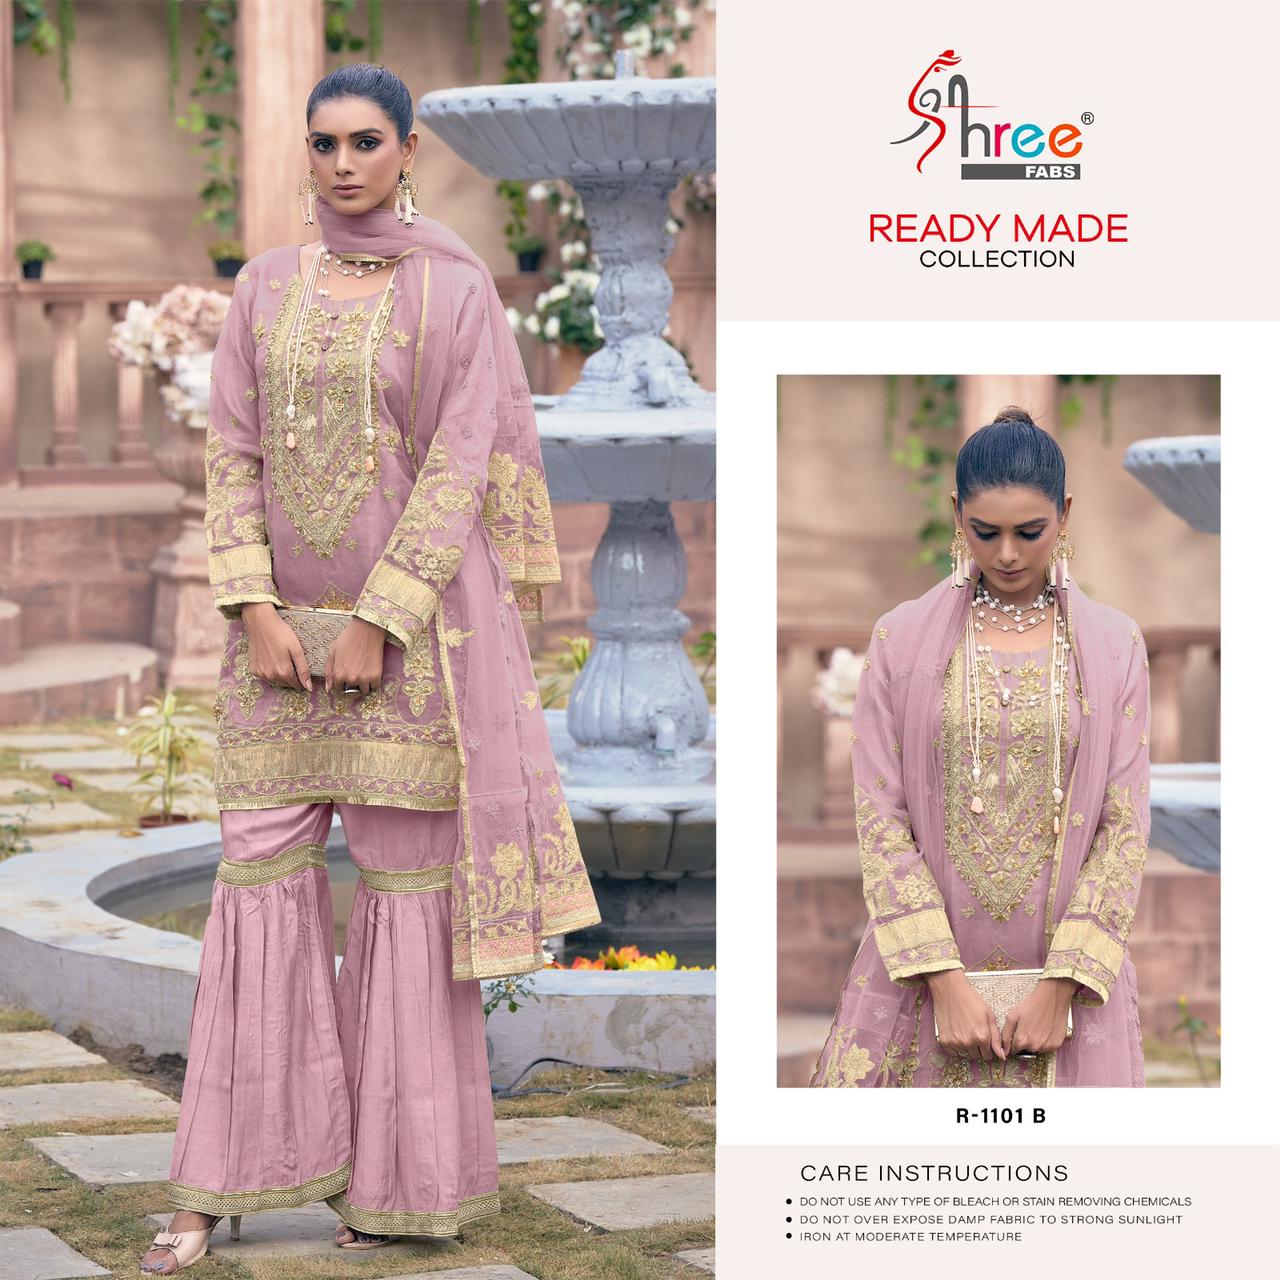 SHREE FABS R 1101 B READYMADE SUITS IN INDIA